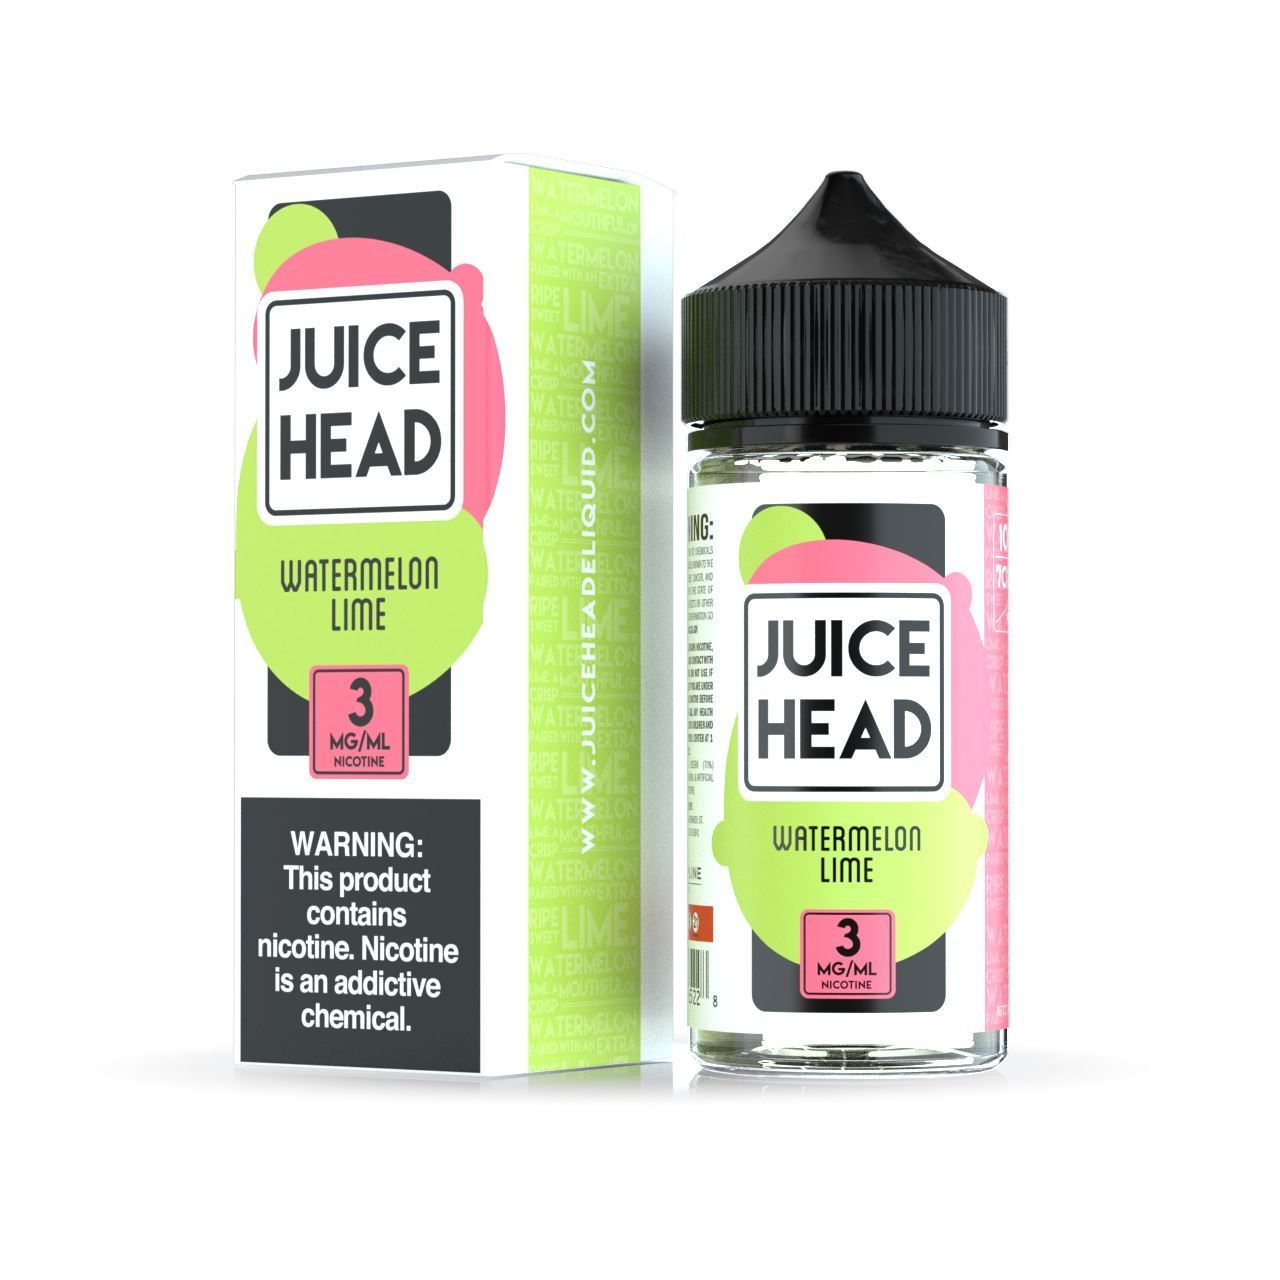 Watermelon Lime by Juice Head Series 100ml with Packaginng